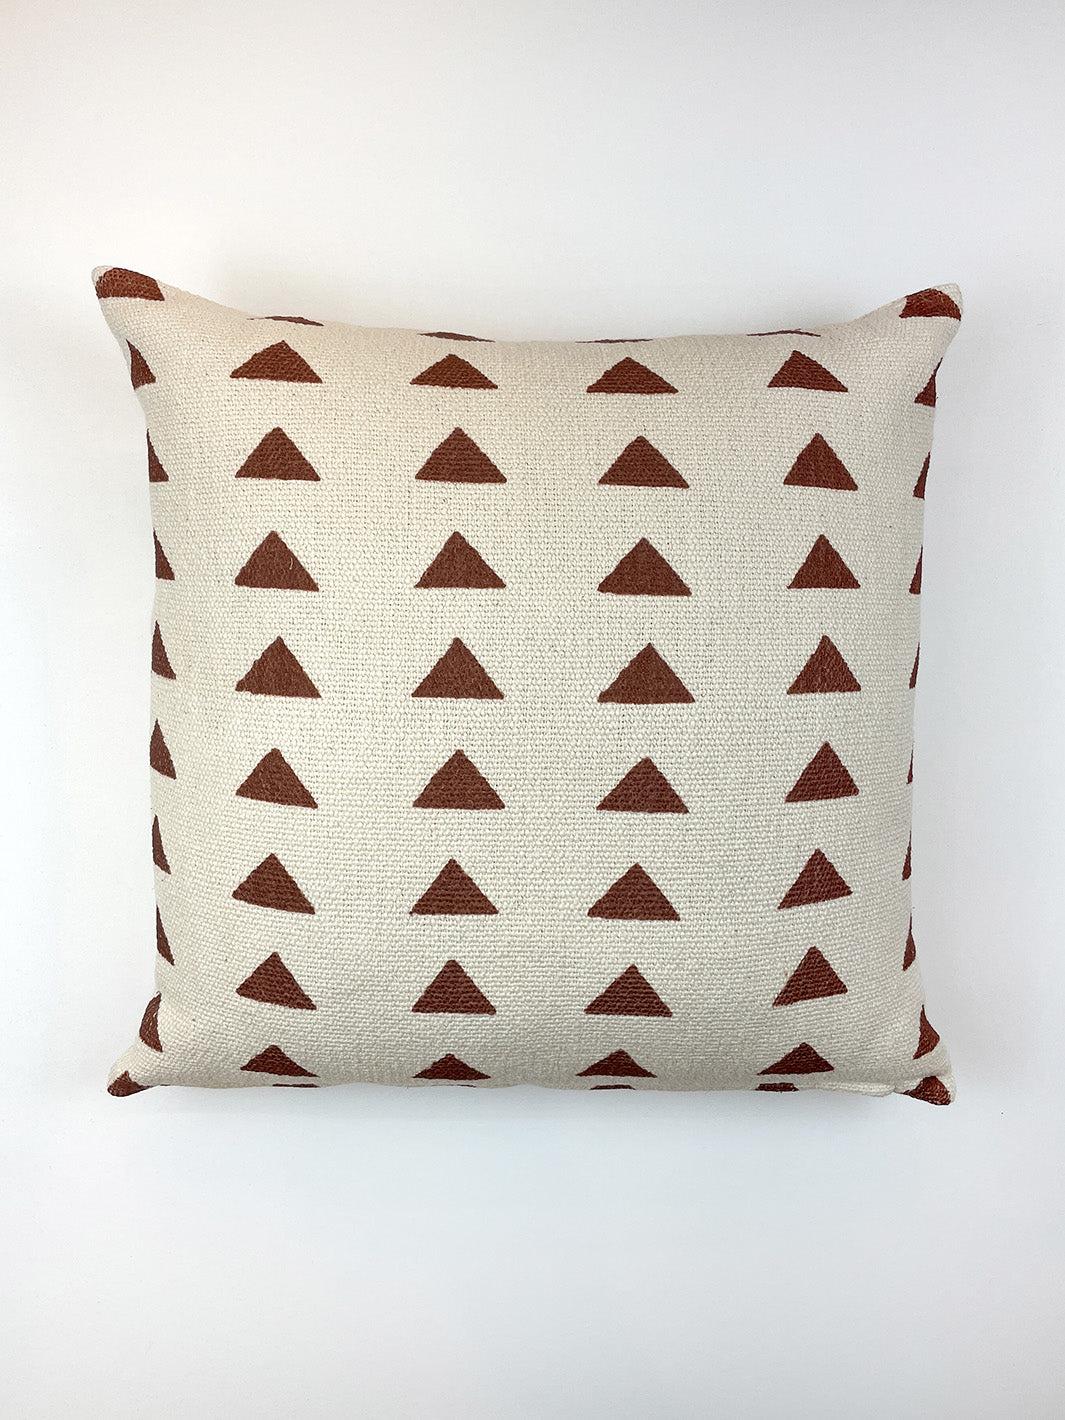 'Triangles' Throw Pillow by Nathan Turner - Rust on California Cotton